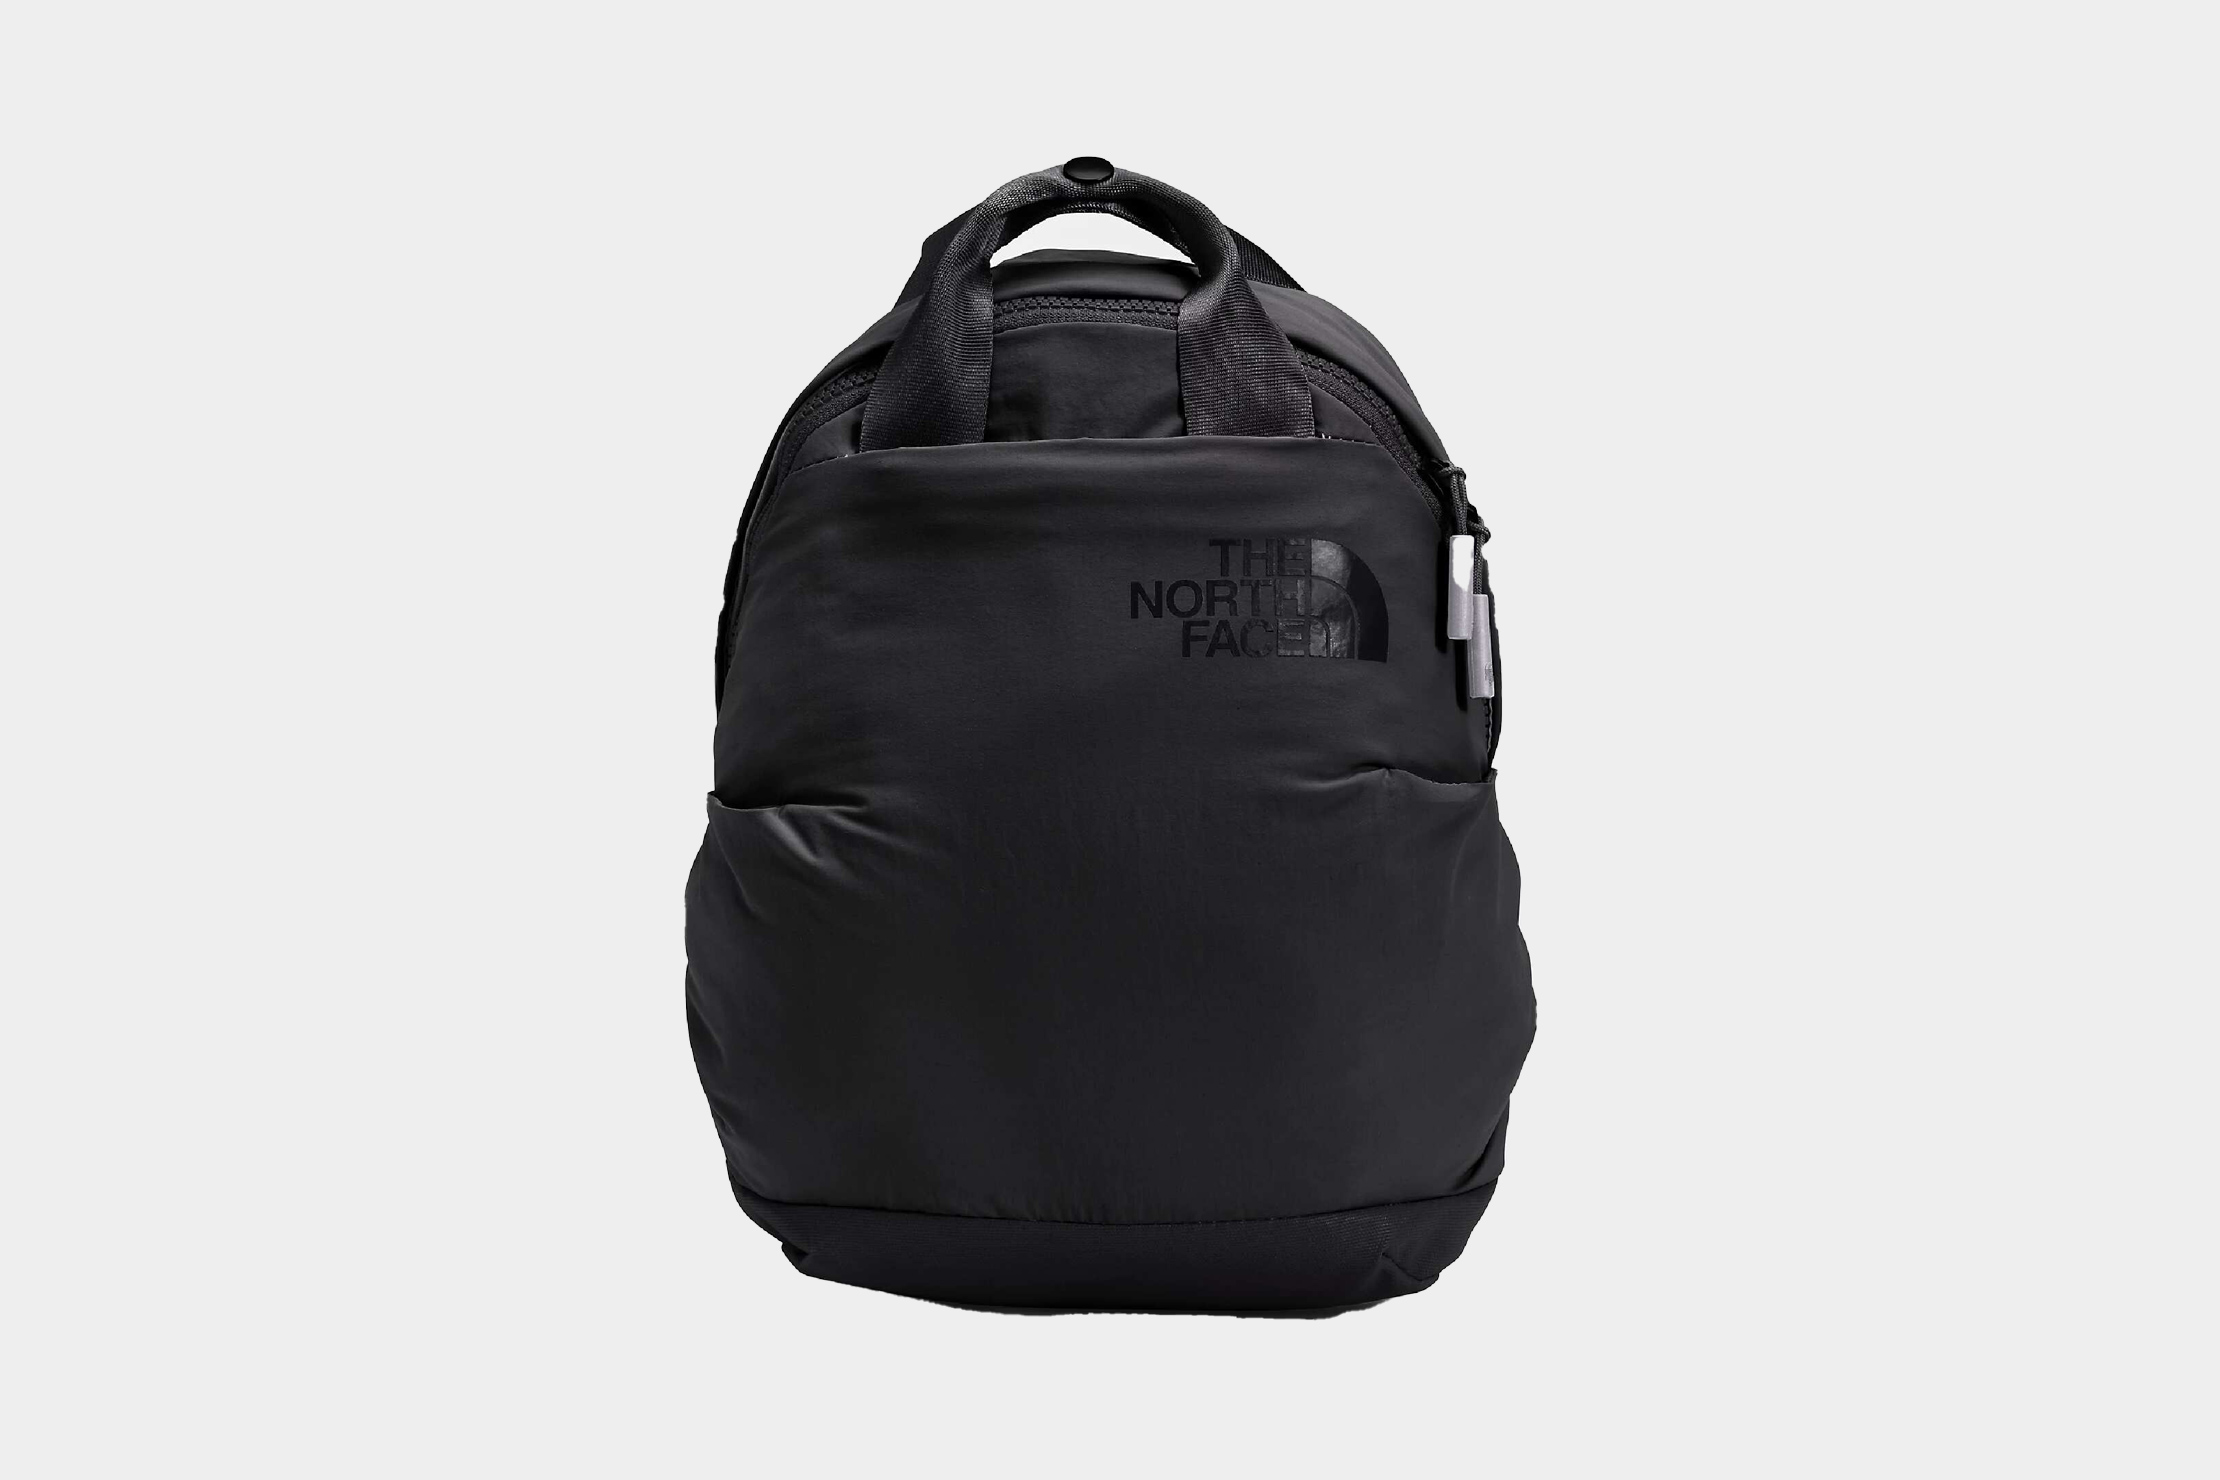 The North Face Women's Never Stop Mini Backpack | Pack Hacker